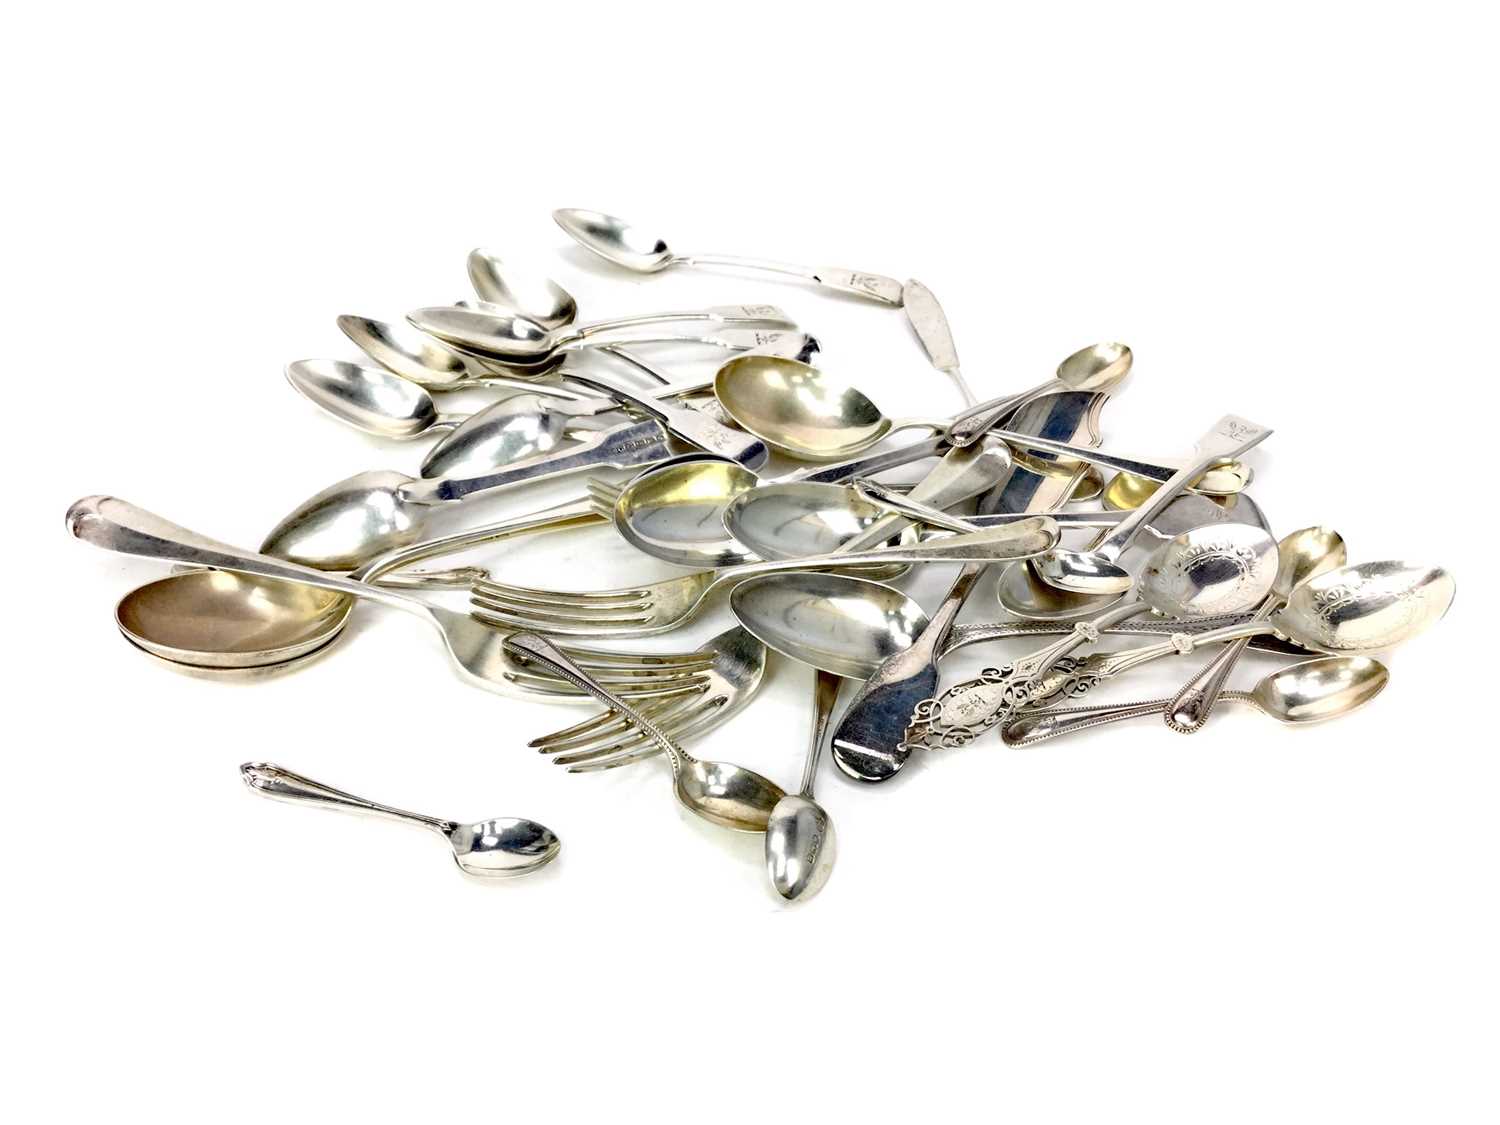 Lot 428 - A SET OF ELEVEN VICTORIAN SILVER TEASPOONS ALONG WITH OTHER COMPOSITE GROUPS OF FLATWARE